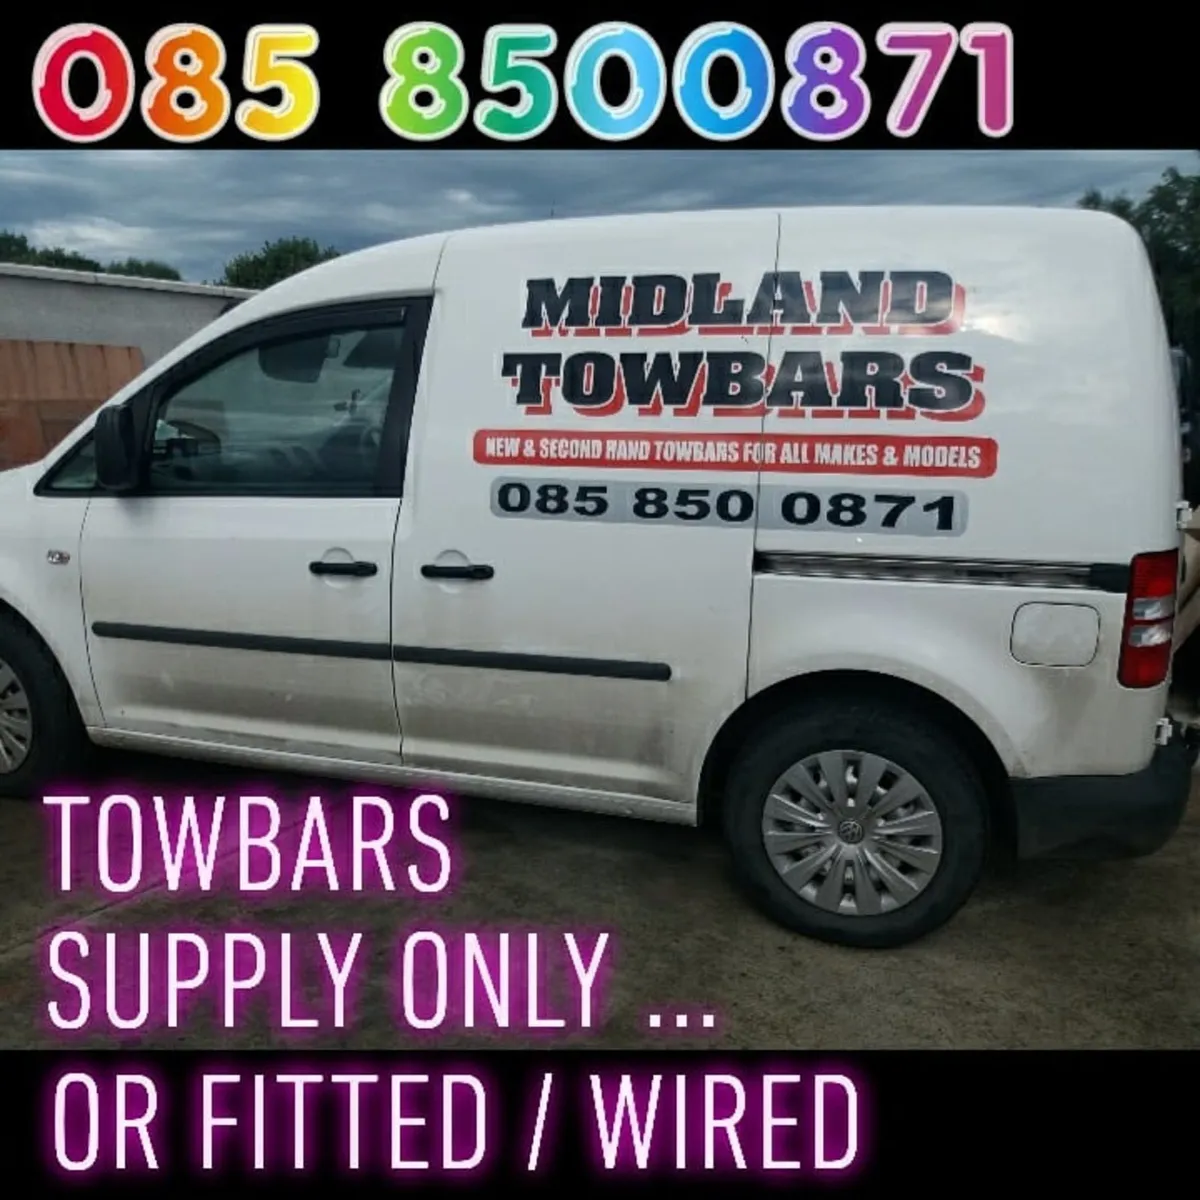 TOWBARS / HITCHS ...  SUPPLY ONLY - Image 1